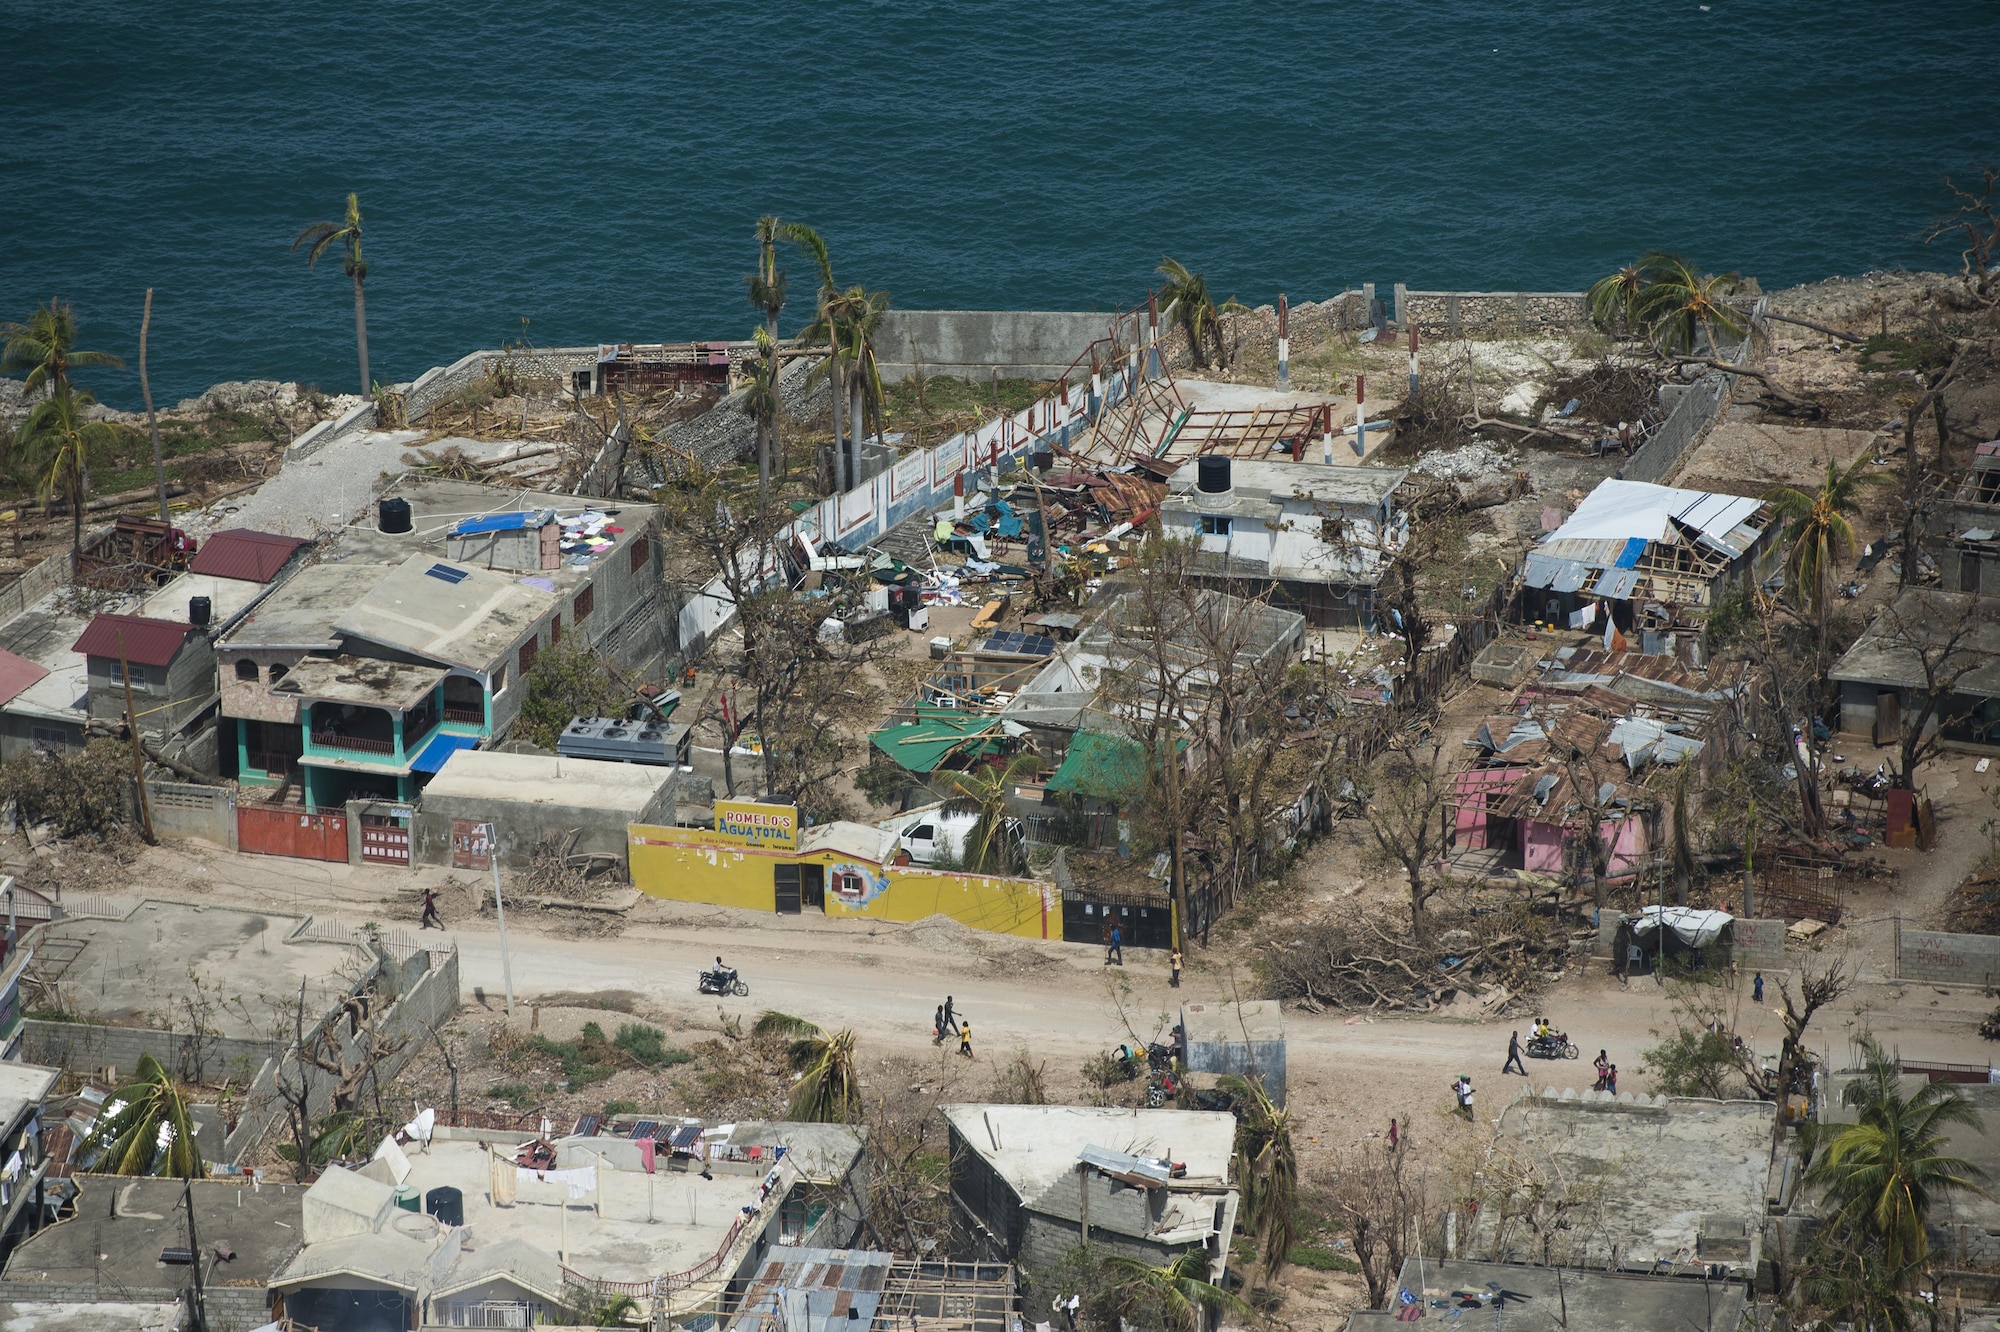 Jeremie, the Grande’Anse department capital in western Haiti, was hit hard by Hurricane Matthew Oct. 4, 2016. U.S. forces have been working alongside Haitian citizens as part of Joint Task Force Matthew to provide relief. (U.S. Air Force photo/Tech. Sgt. Russ Scalf)